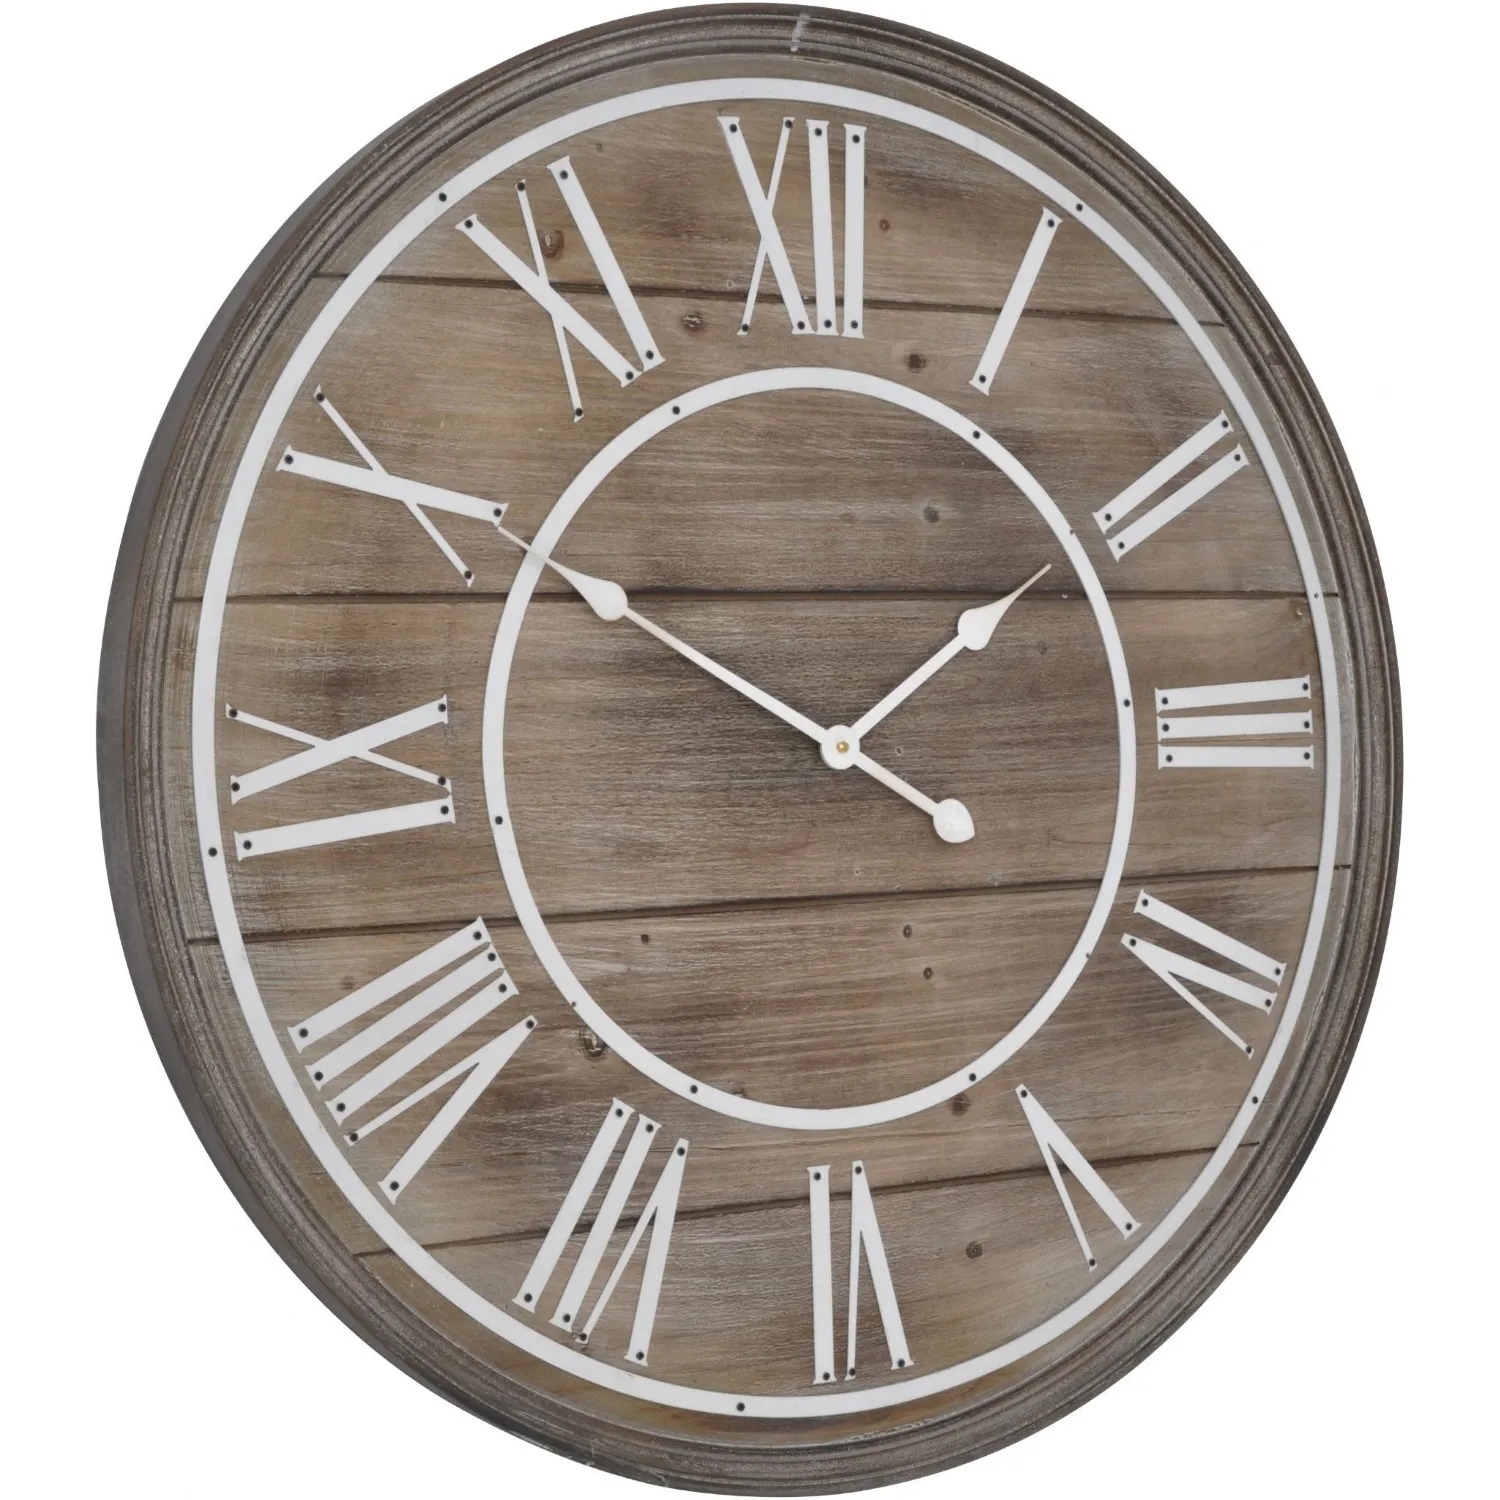 Bleach Wooden Round Wall Clock With Acrylic Roman Numerals